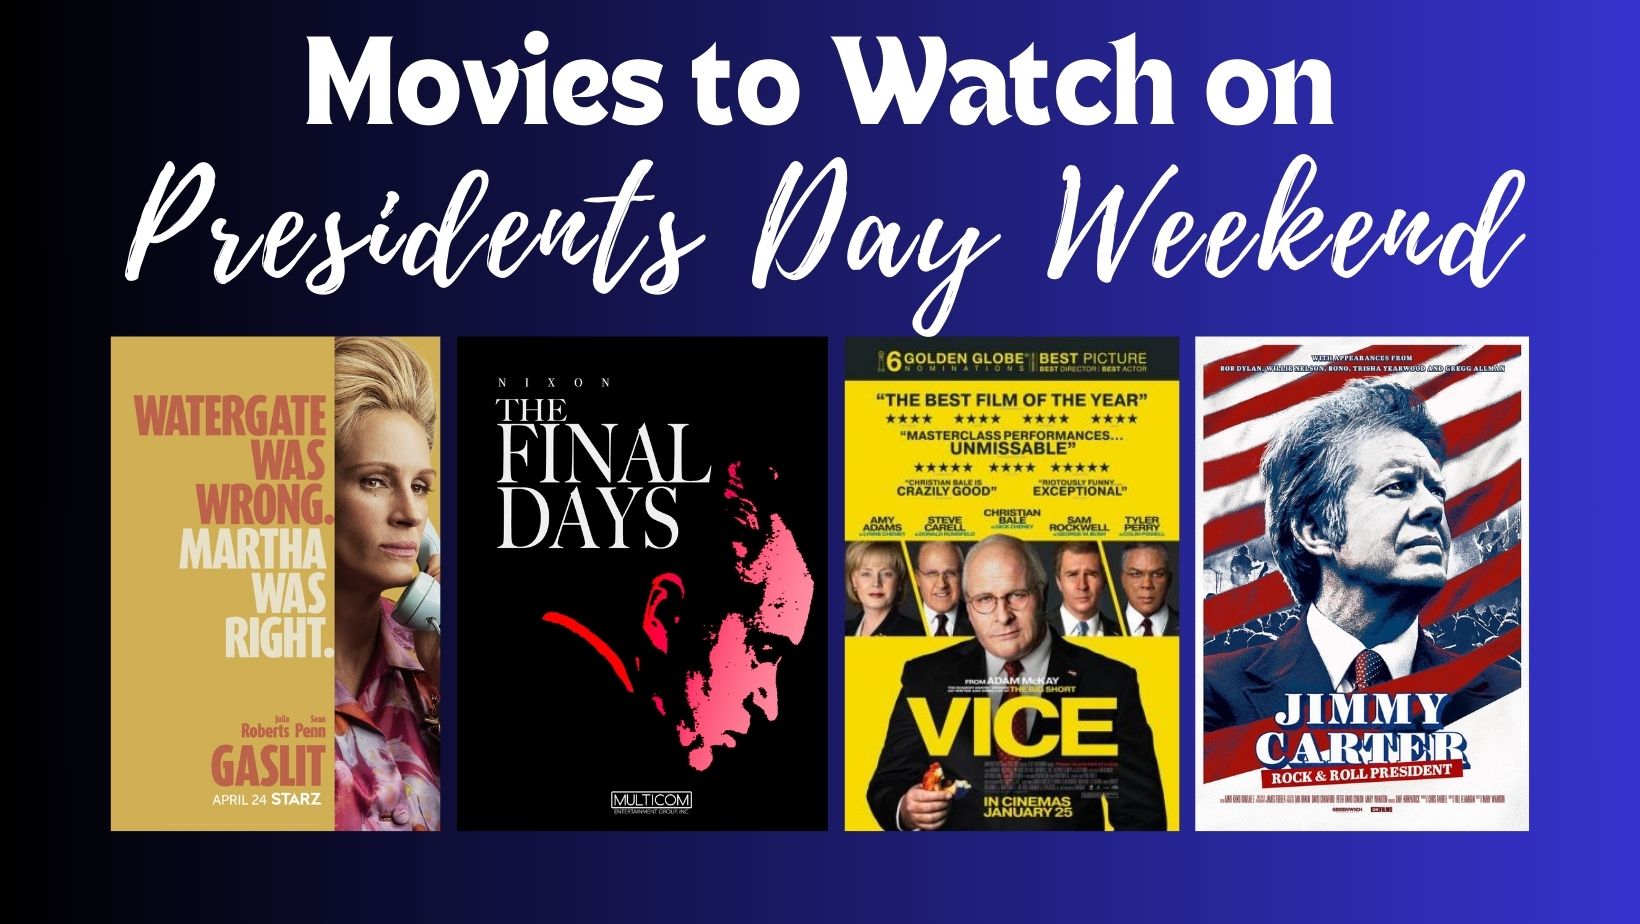 33 Movies About American Presidents to Watch for Presidents Day Weekend